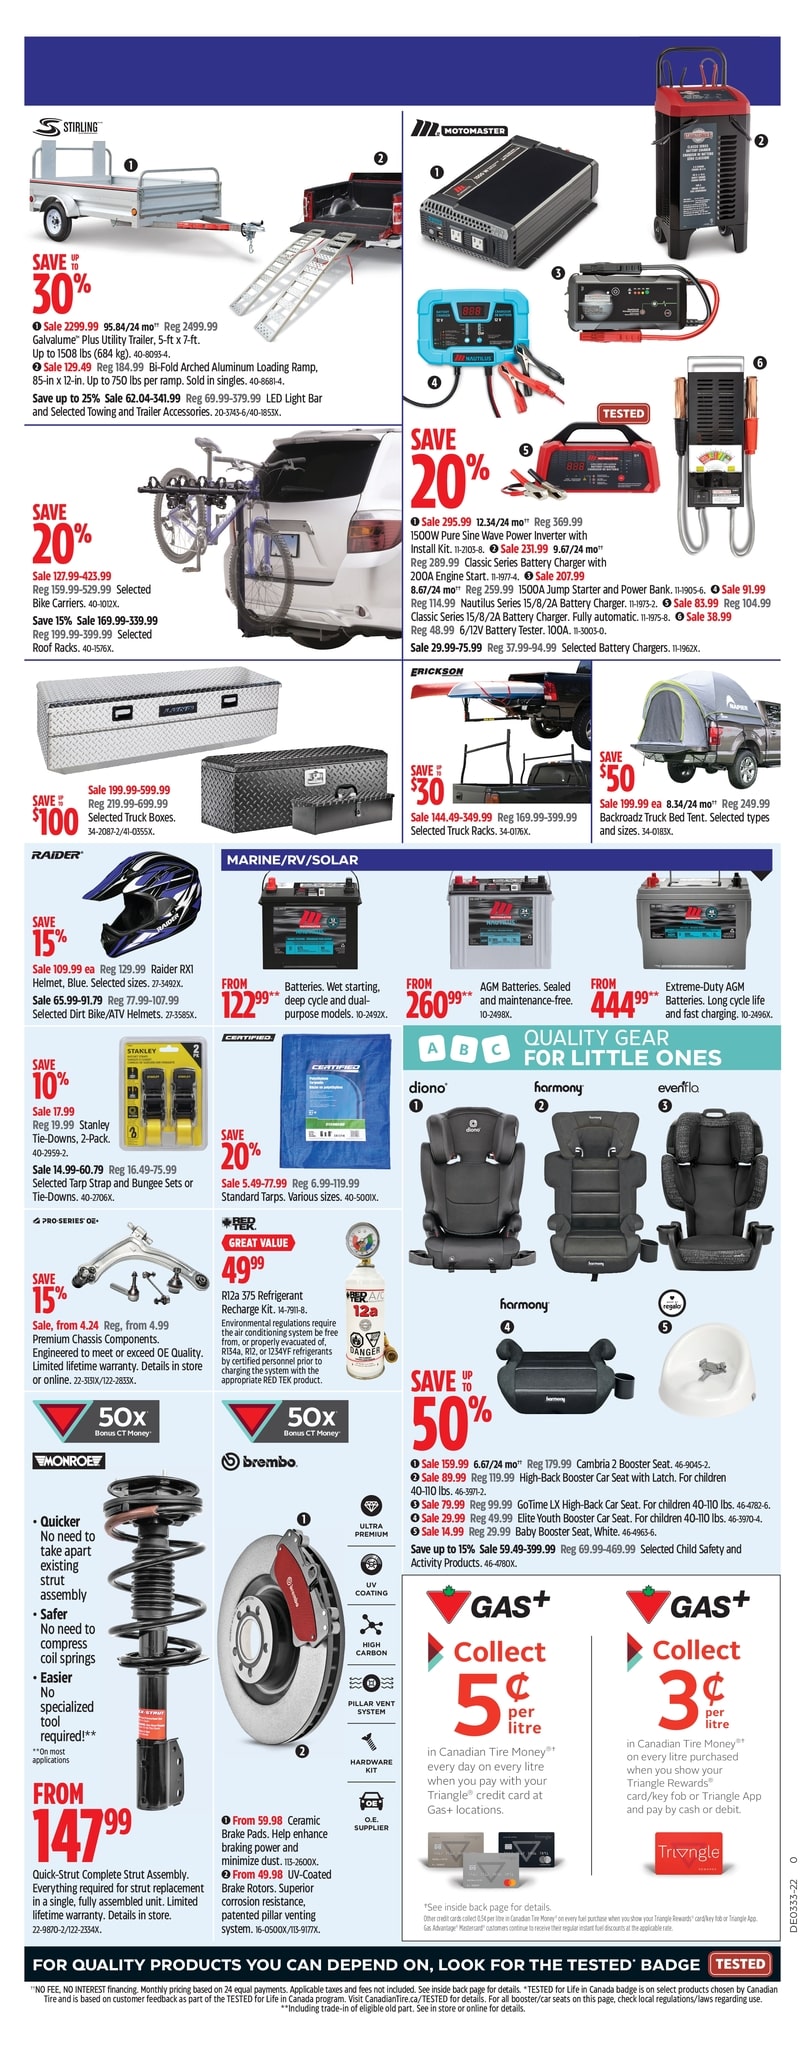 Canadian Tire - Weekly Flyer Specials - Page 16